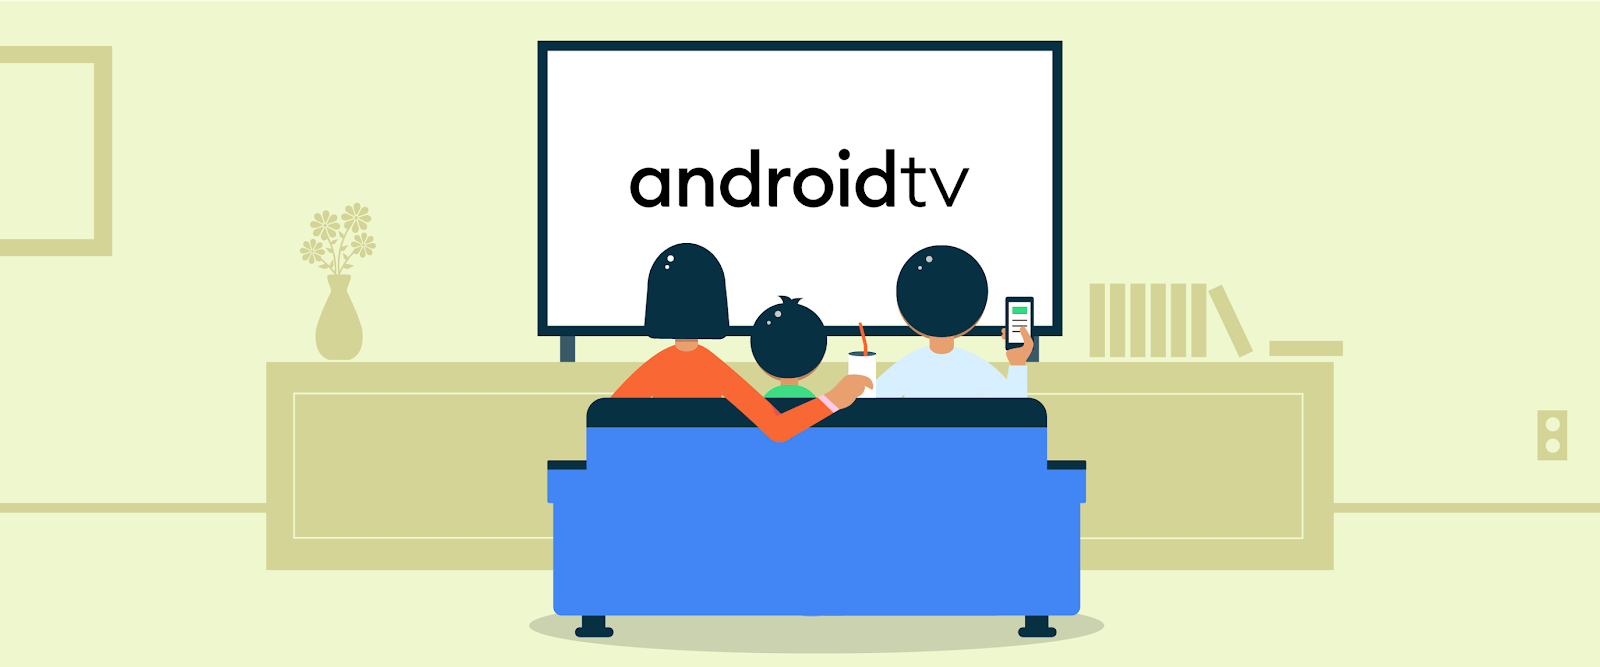 Introducing Android 11 on Android TV